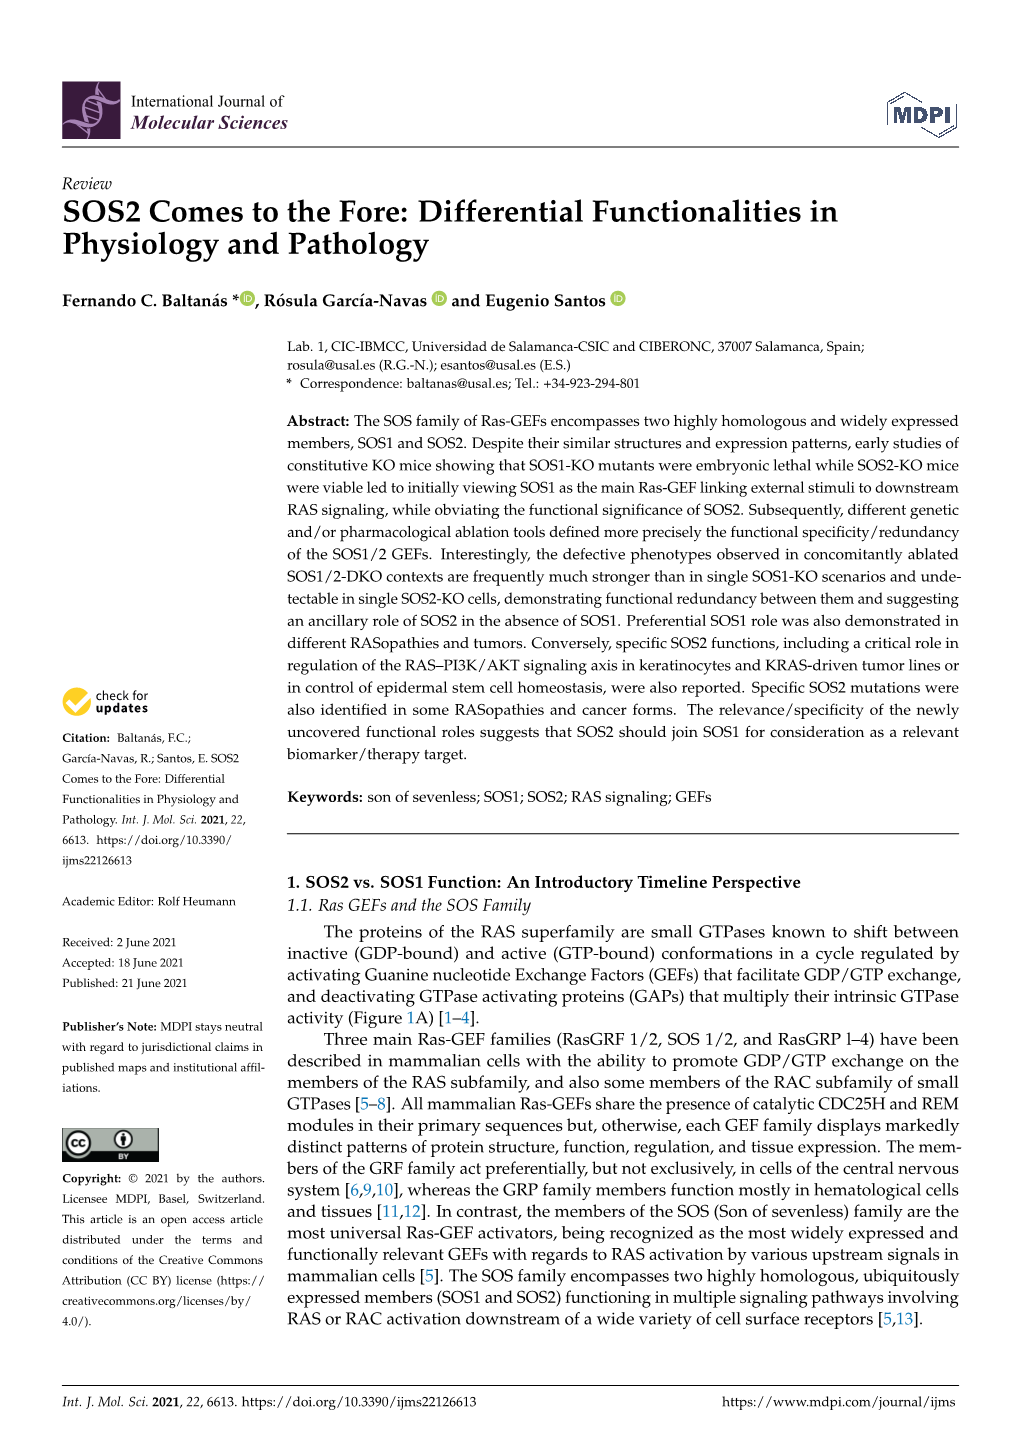 SOS2 Comes to the Fore: Differential Functionalities in Physiology and Pathology